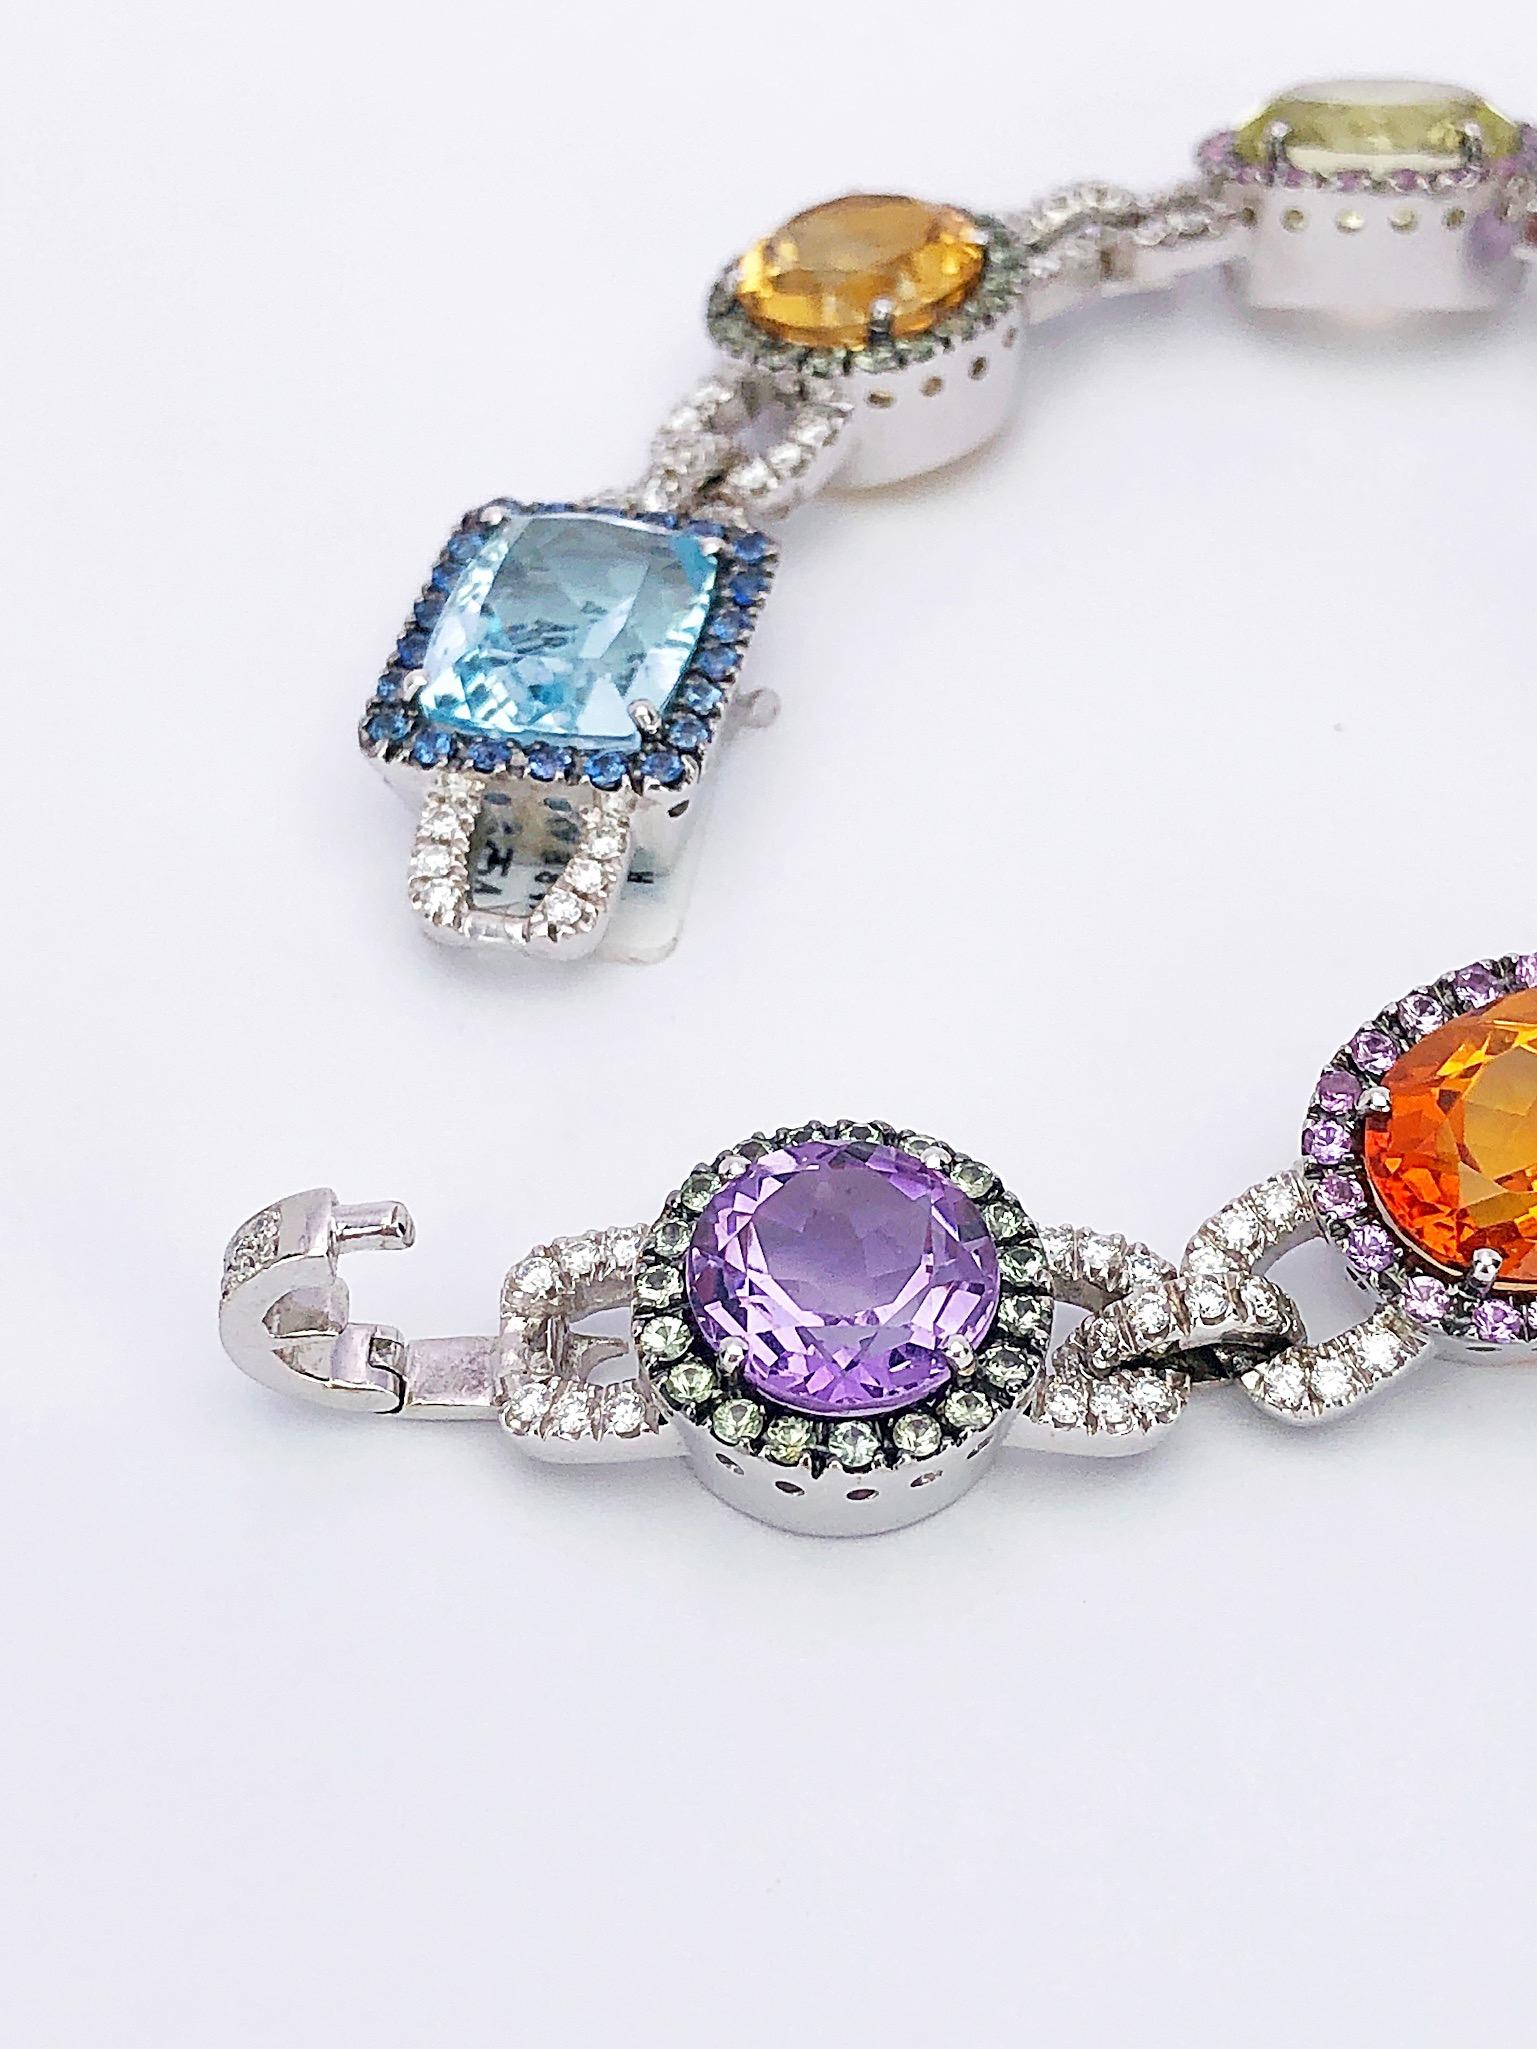 This bracelet is composed of 48.76 carats of semi-precious gemstones. The beautiful array of stones is outlined with 3.93 carats of sapphires and linked with 2.08 carats of pavé diamonds. Set in 18-karat white gold. The bracelet measures 8